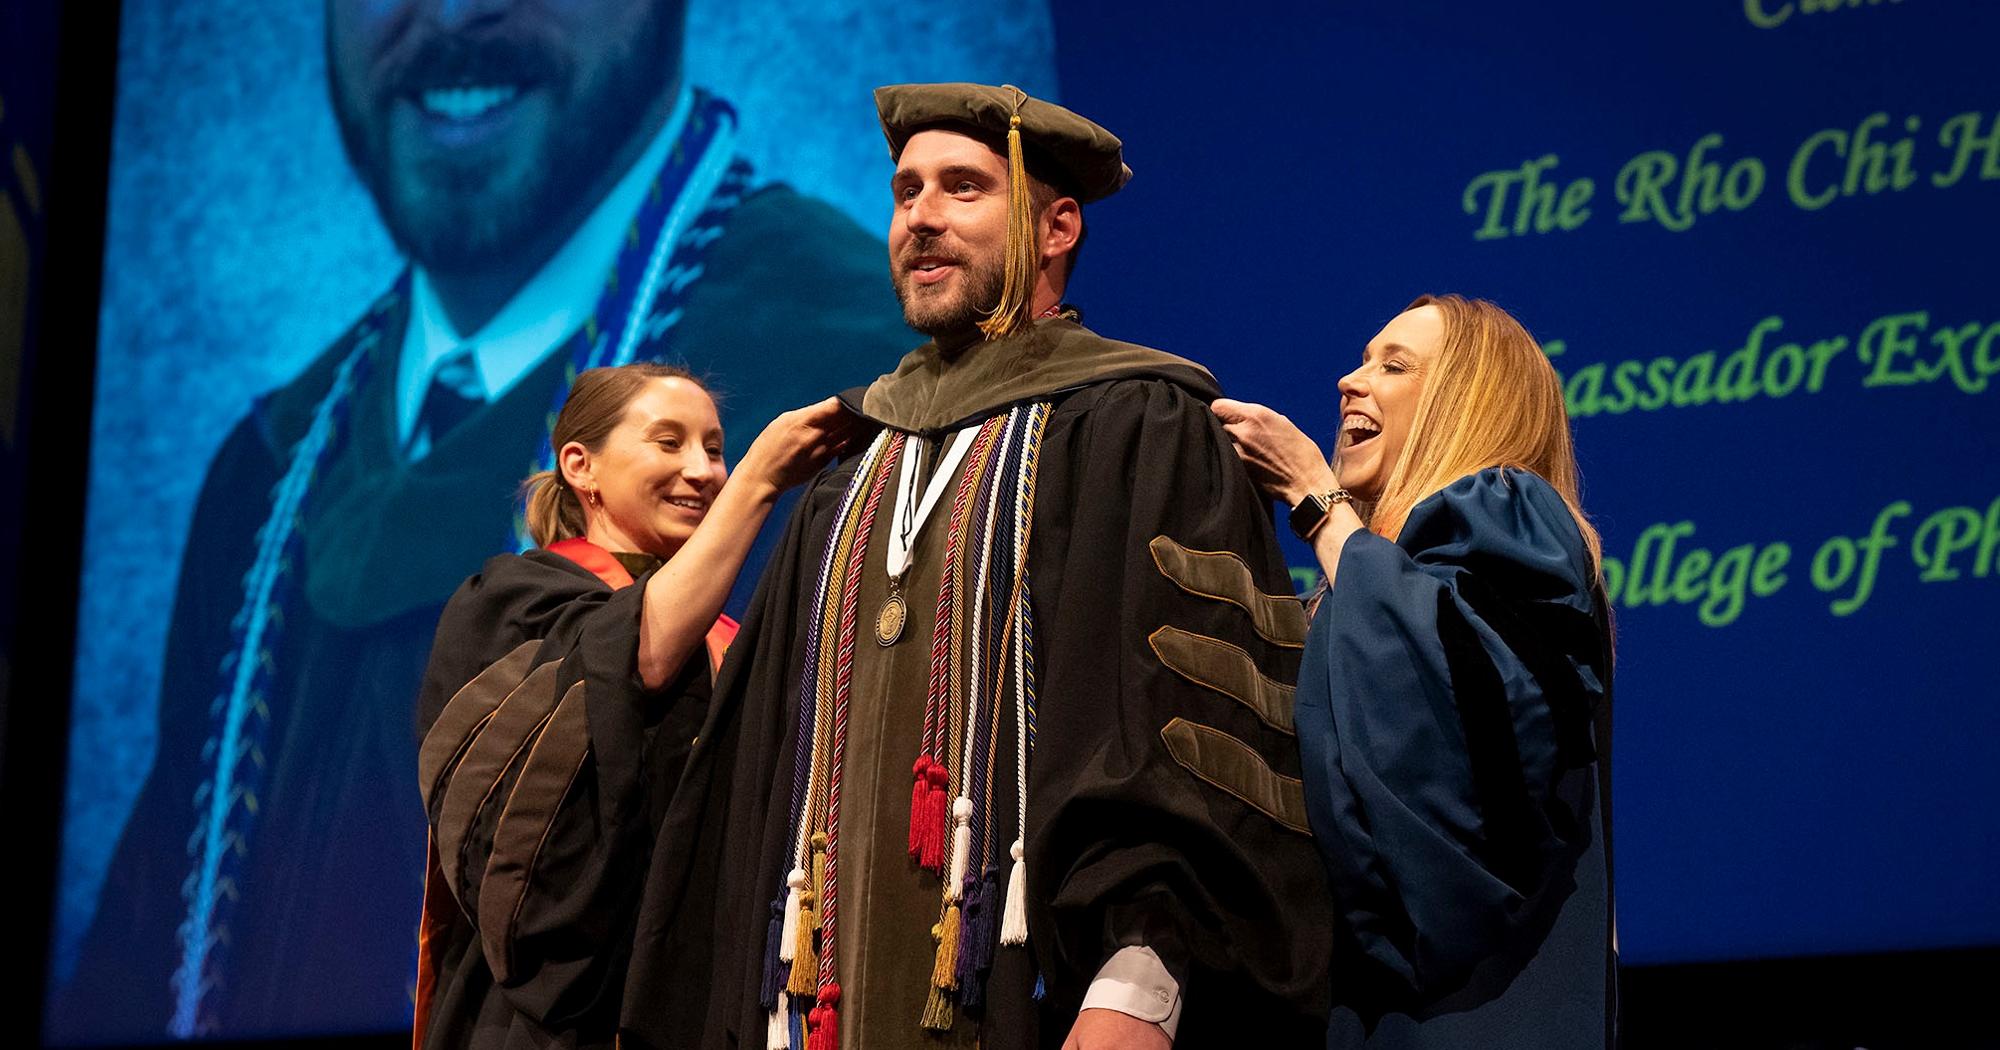 Bill Gatton College of Pharmacy student recieves his doctoral hood at commencement.